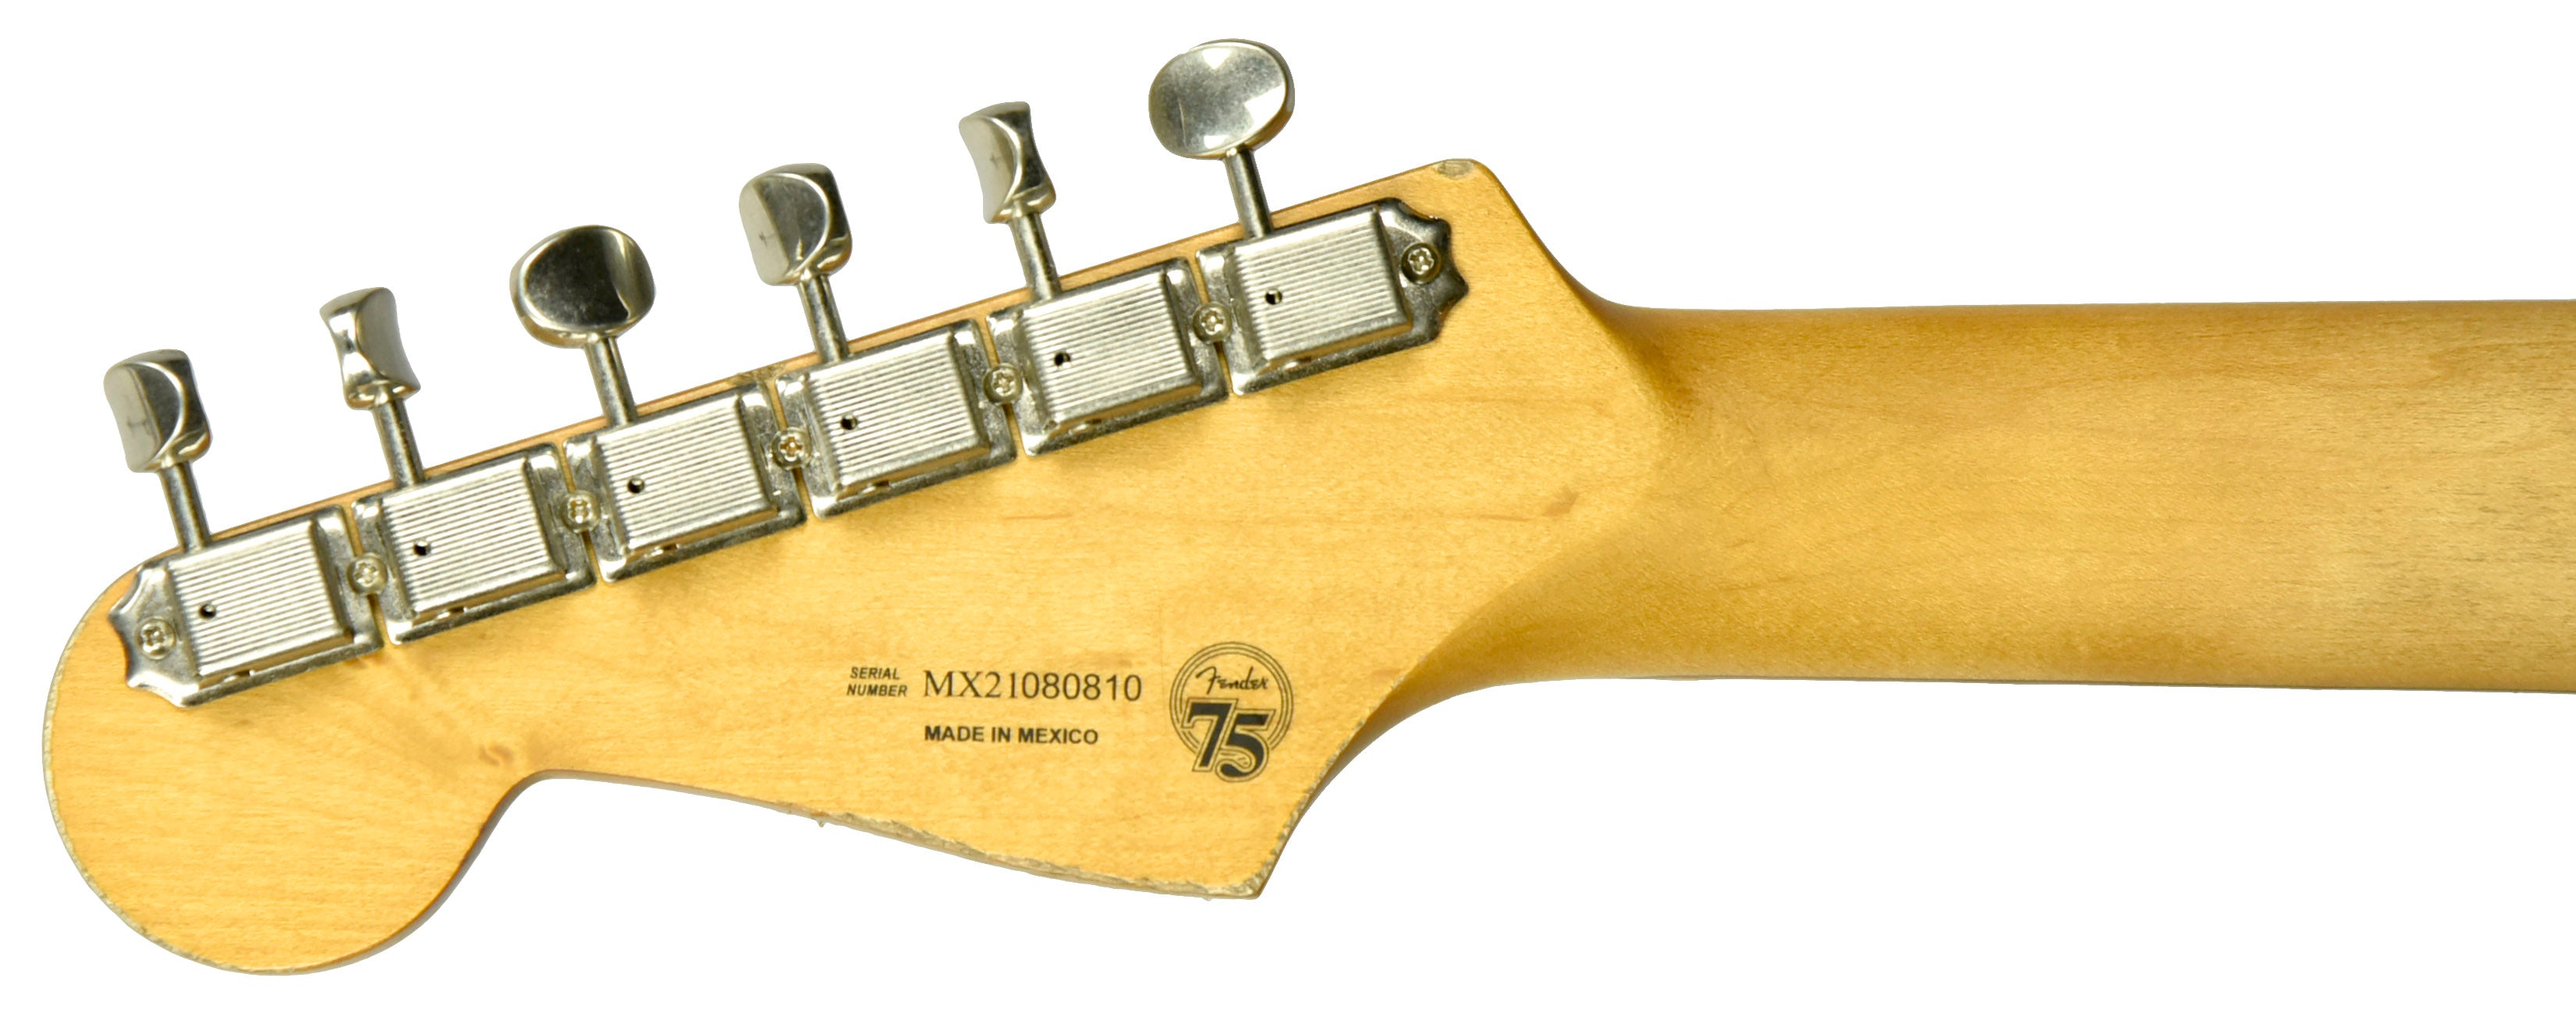 Used Fender Vintera Road Worn 60s Stratocaster in Lake Placid Blue  MX21080810 | The Music Gallery